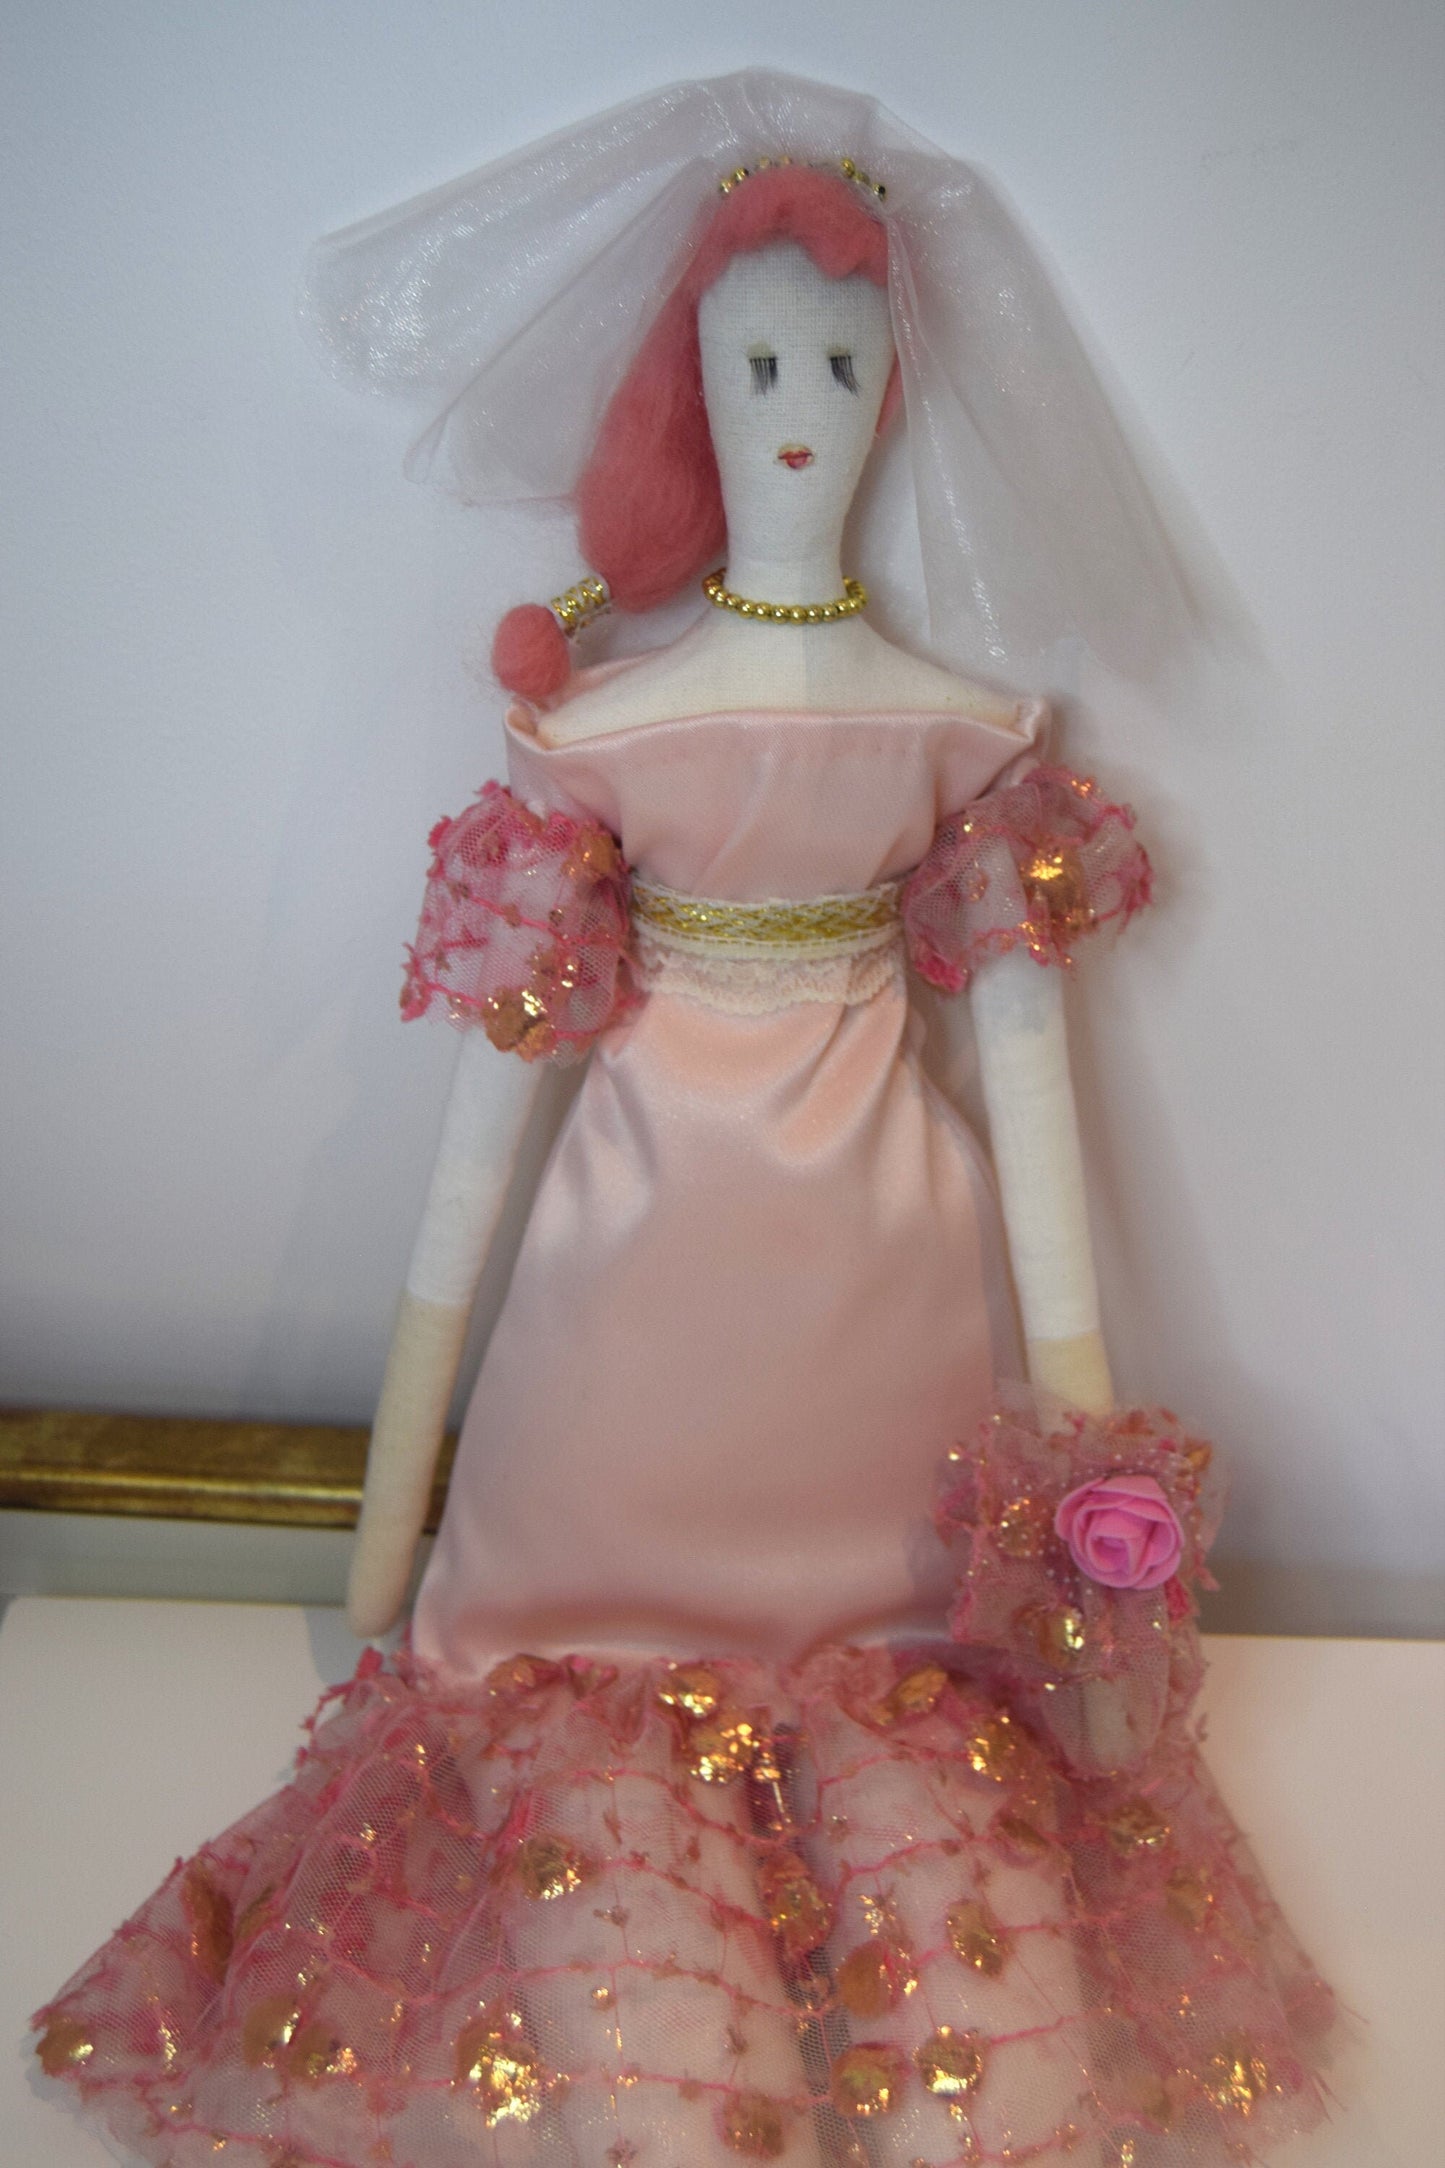 Handmade Fabric Doll - Bride with a Bouquet